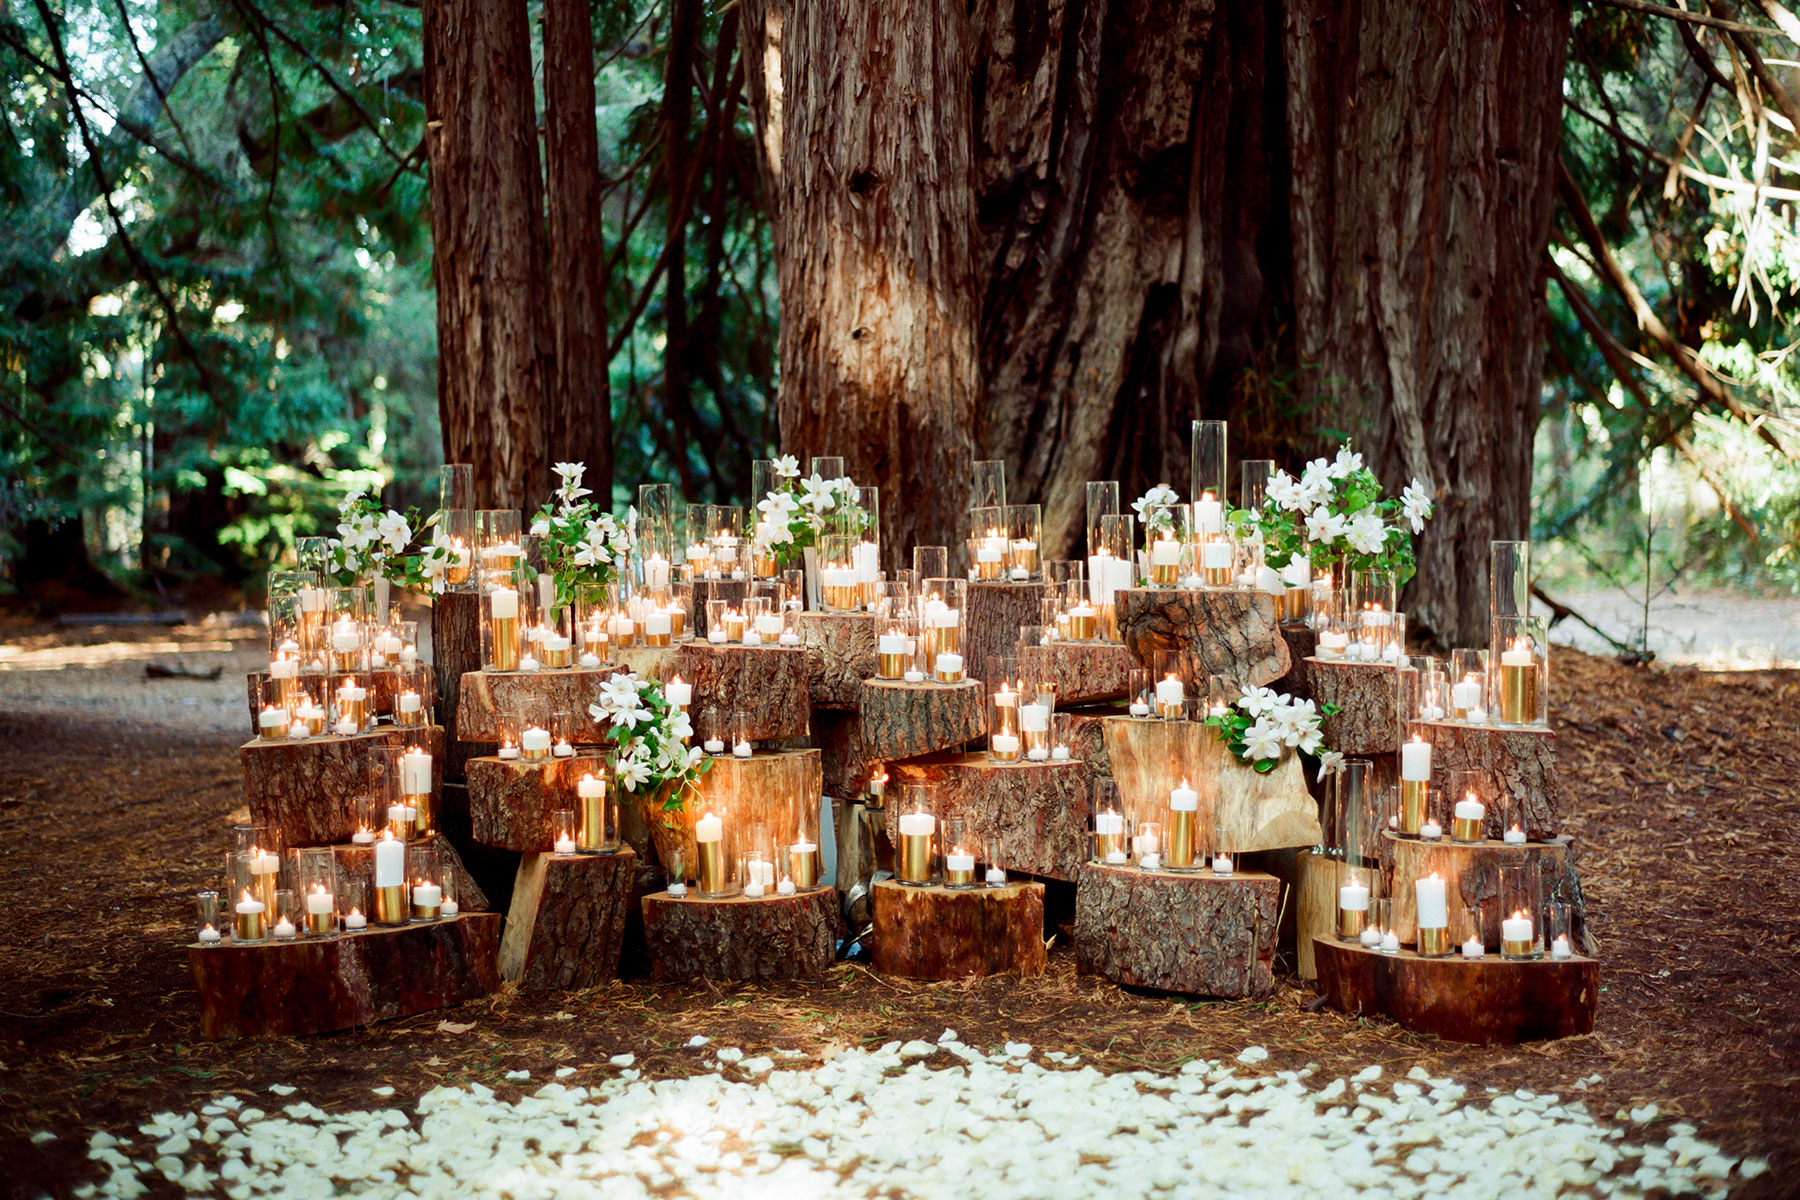 Rustic Wedding Ceremony on the Woods with Candle Backdrop and White Petals on the Floor // 15 Stunning Ways to Decorate with Candles // http://mysweetengagement.com